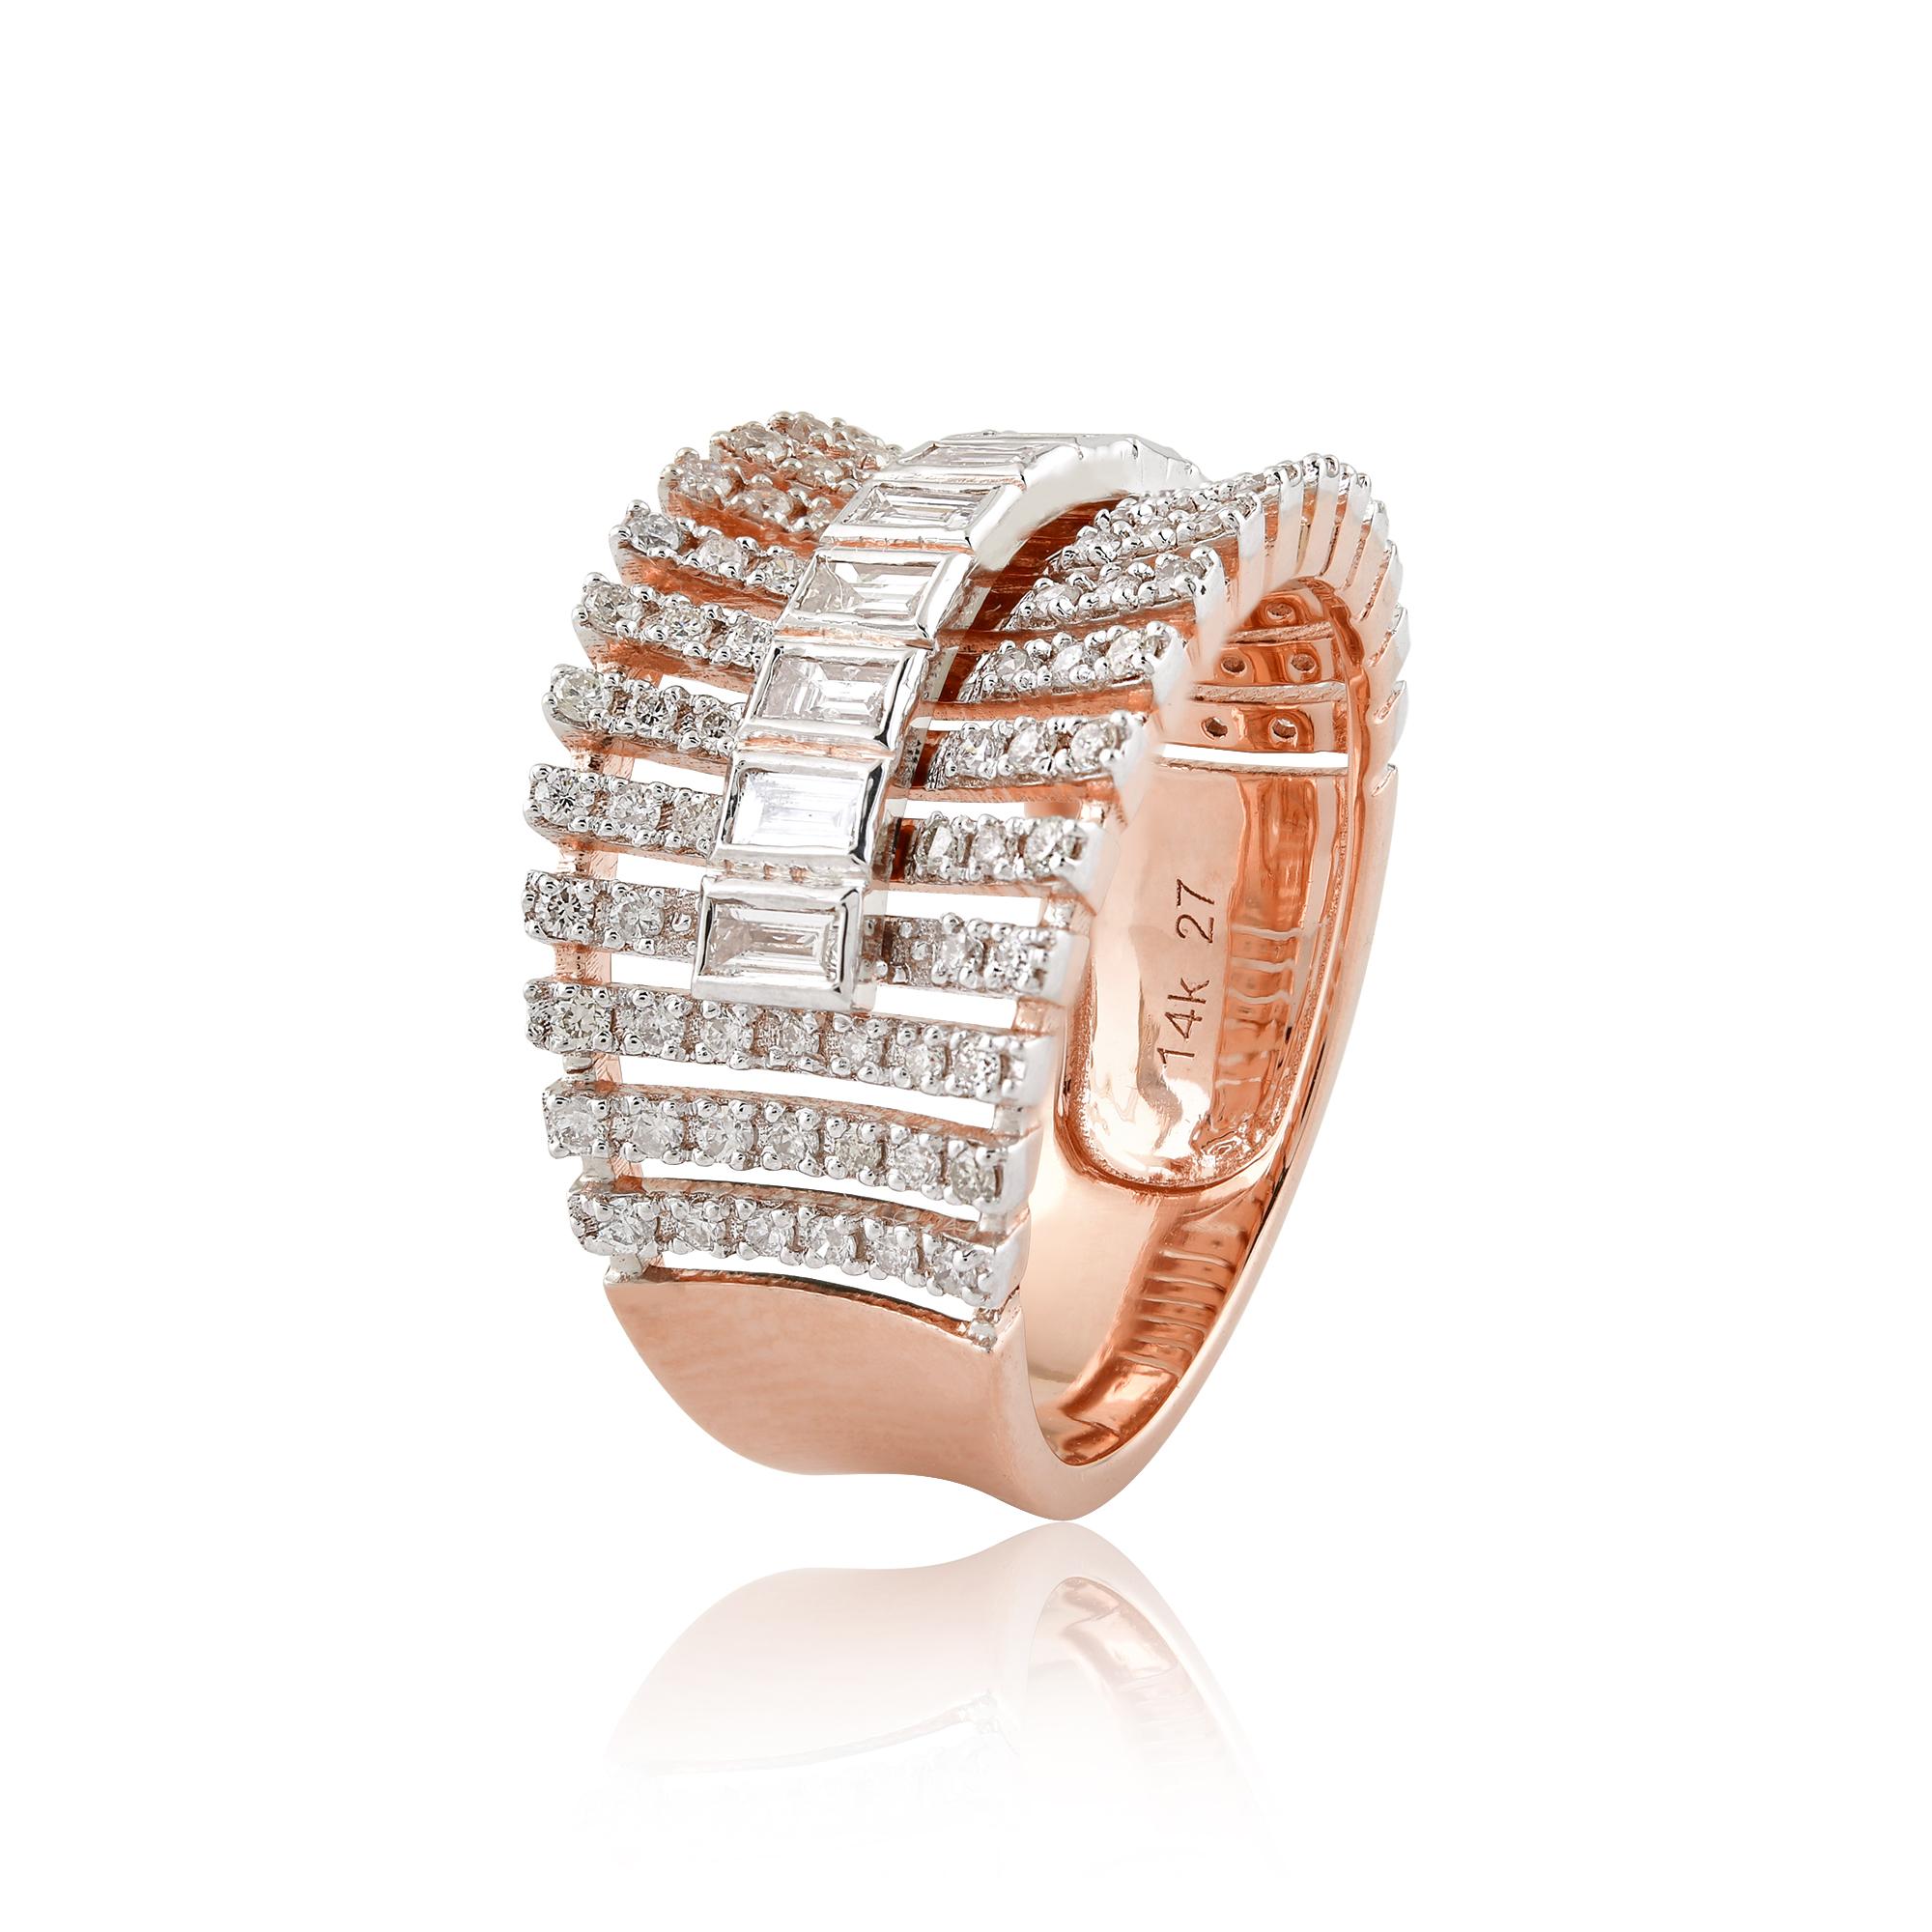 For Sale:  Natural 1.06 Carat Baguette Diamond Cage Ring Solid 14k Rose White Gold Jewelry 3